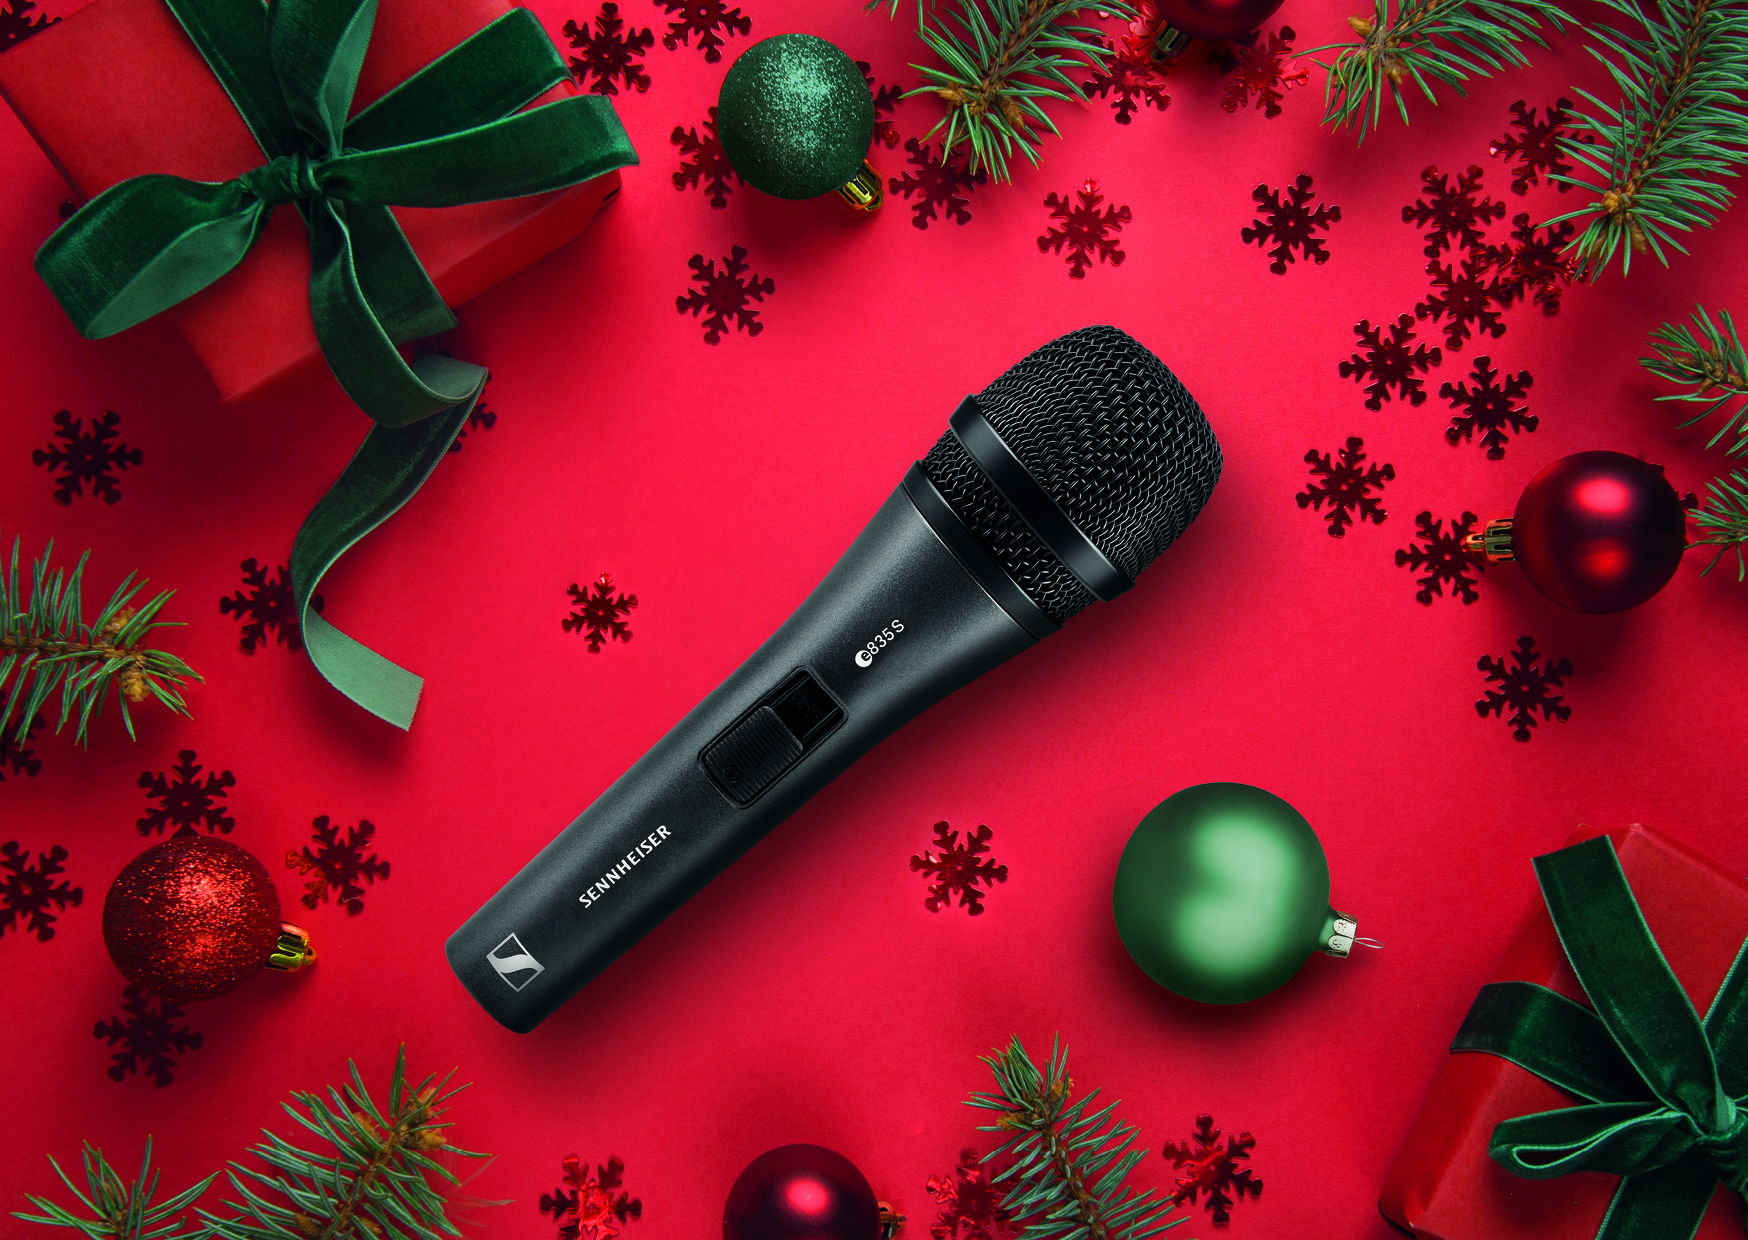 The Sennheiser e 835 / e 835 S is a dynamic, cardioid microphone that’s ideal for vocals and capable of cutting through high on-stage levels